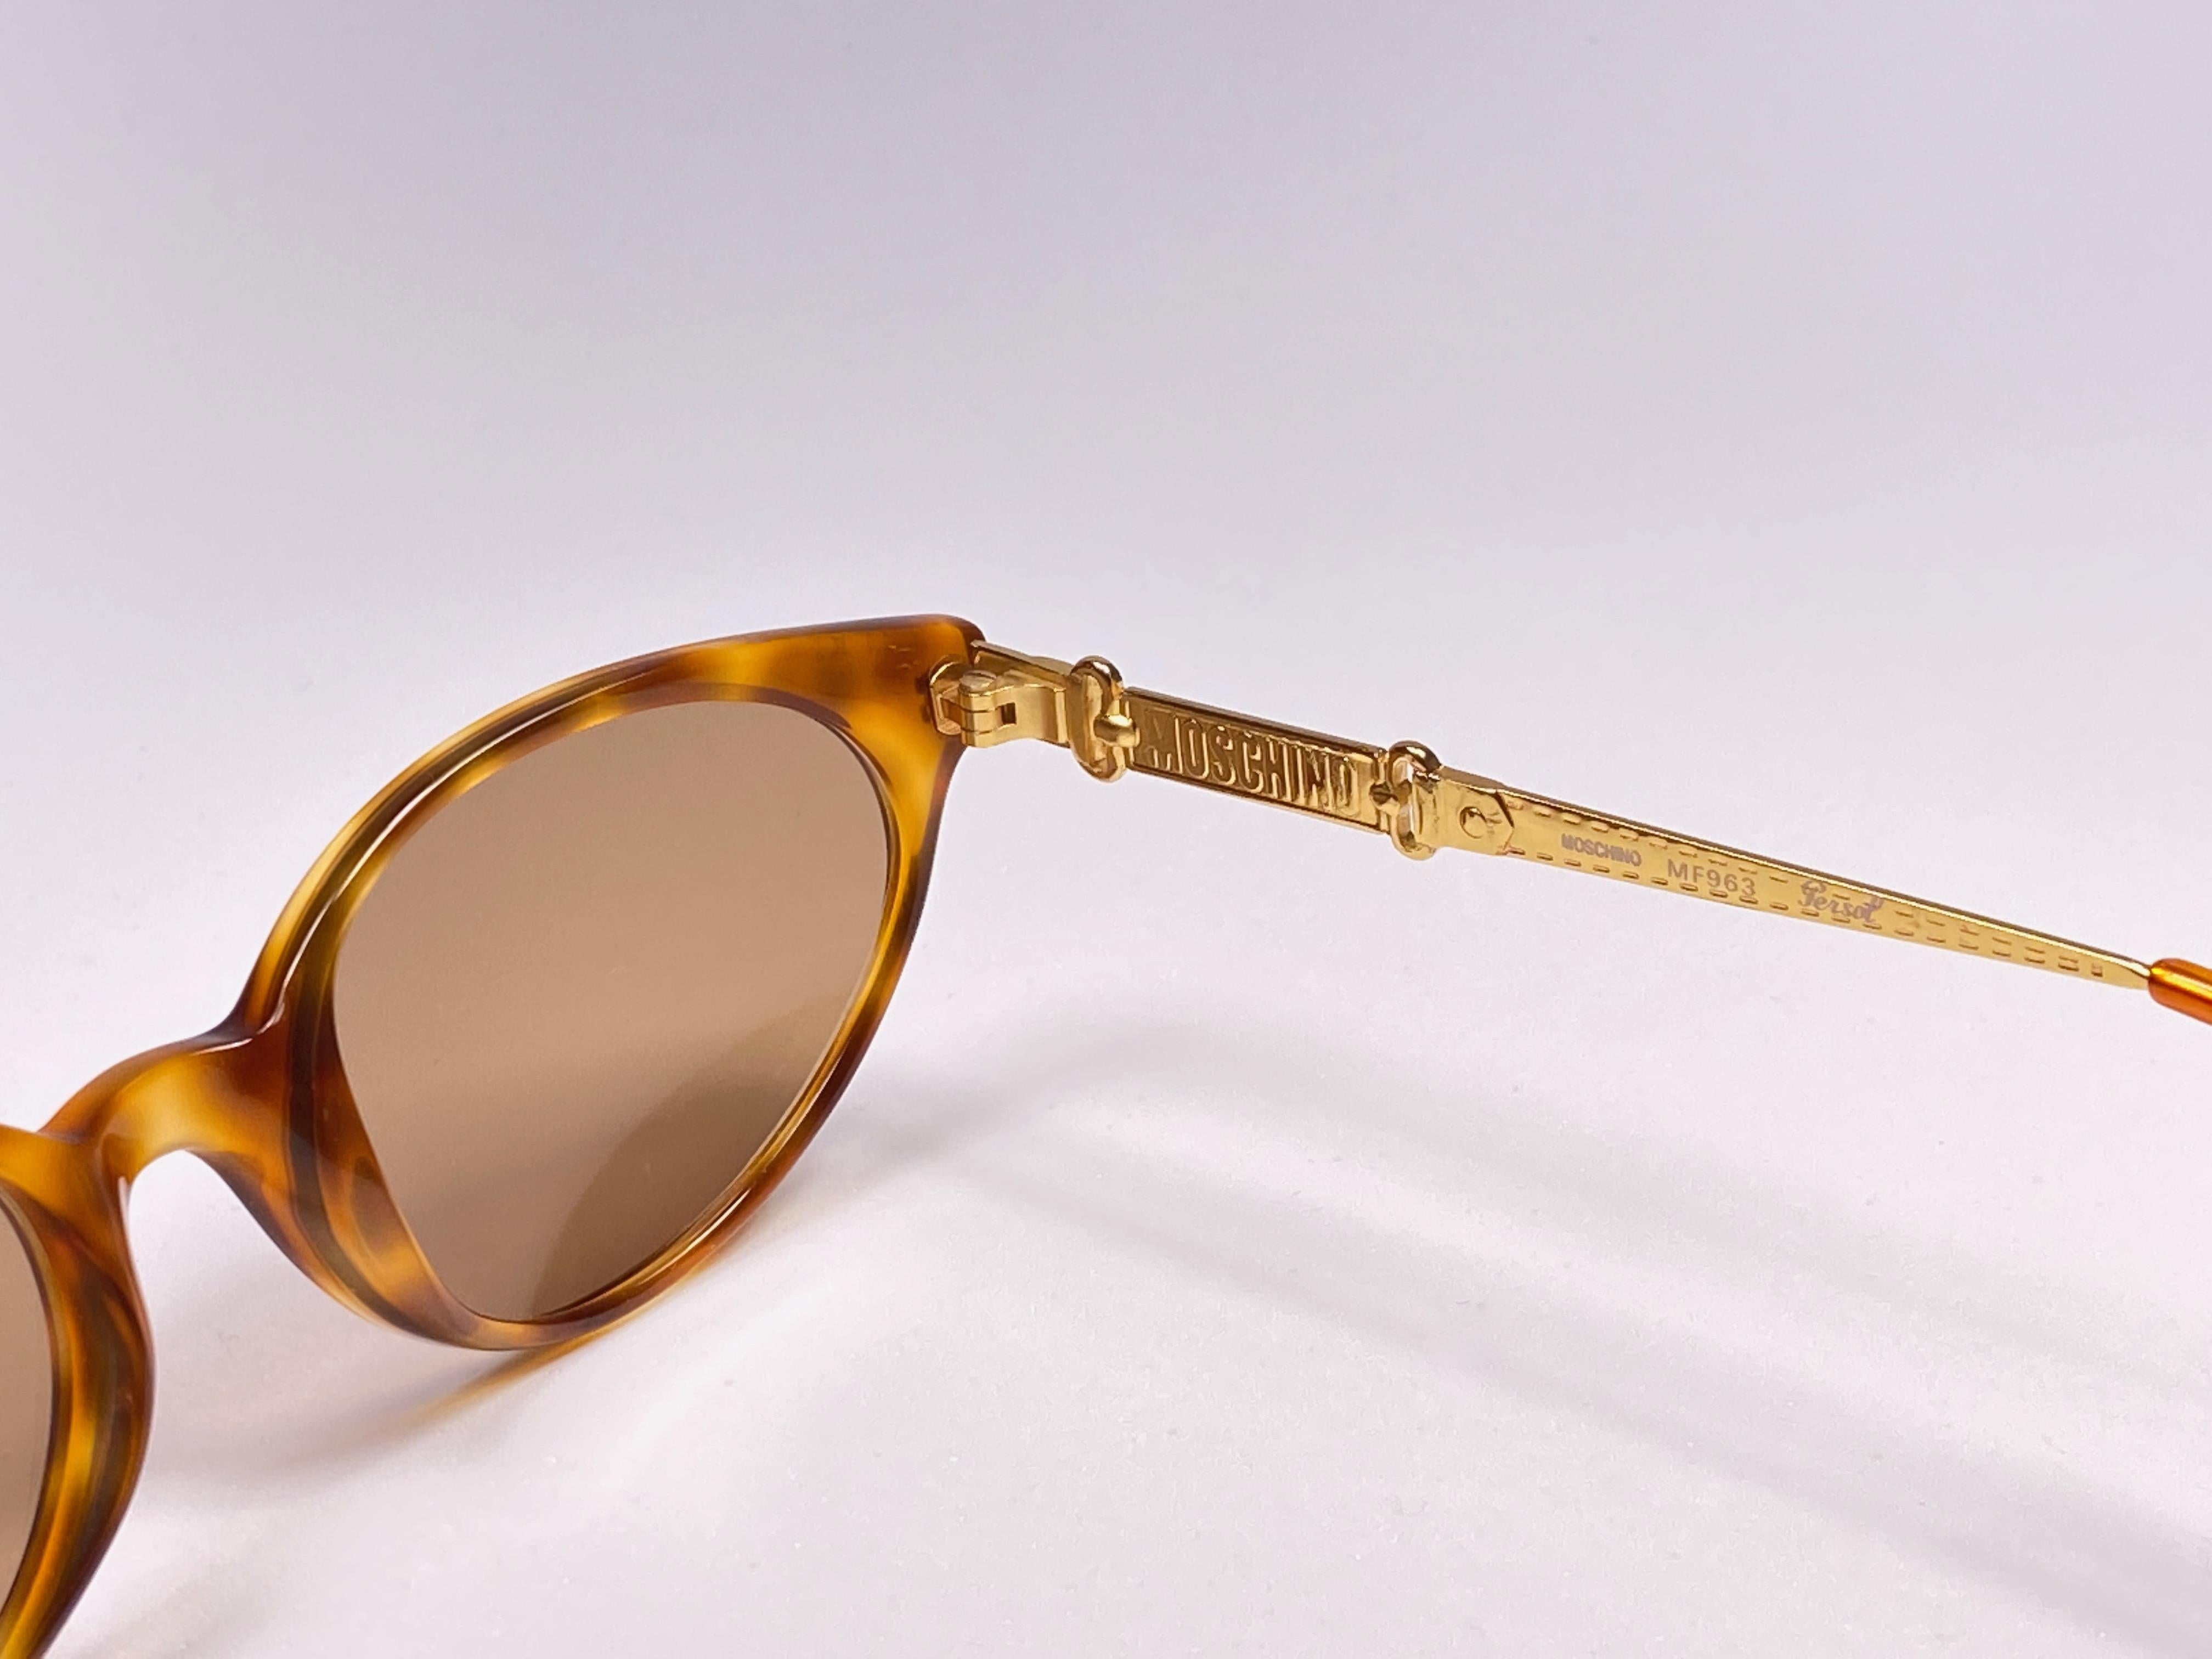 Brown New Vintage Moschino By Persol Tortoise MF963 Cat Eye Sunglasses Made in Italy